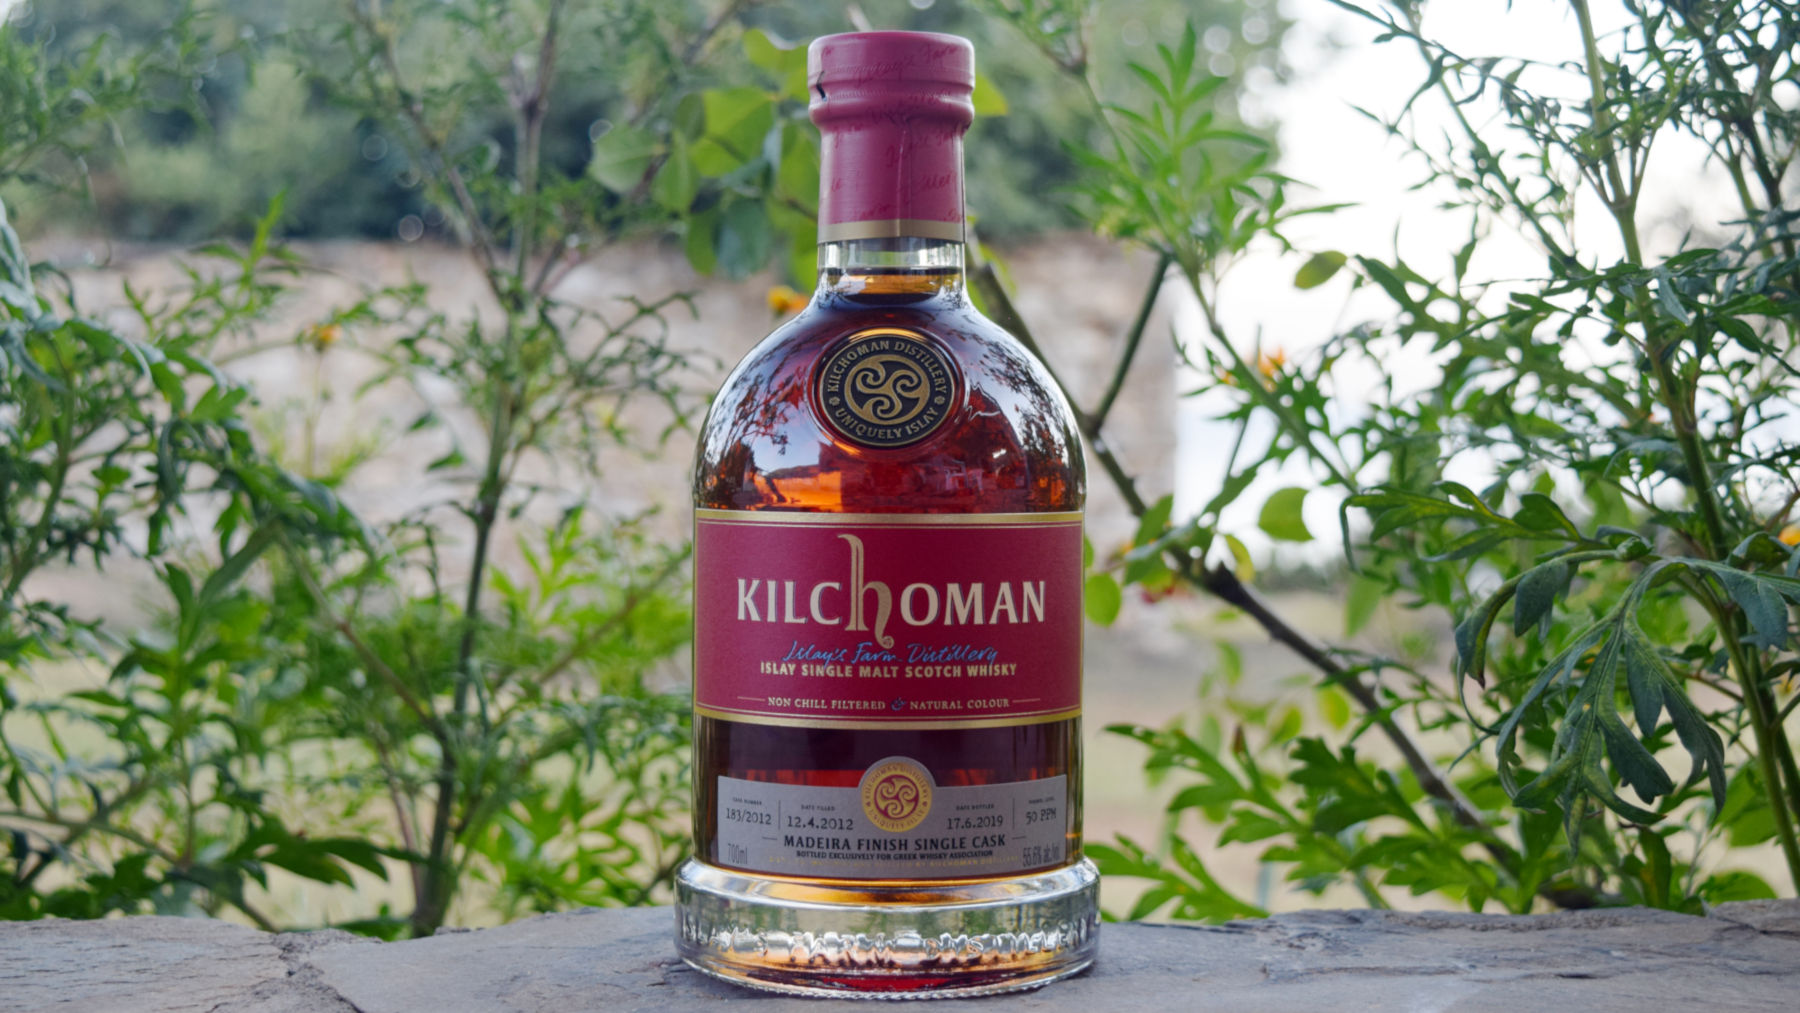 You are currently viewing Kilchoman 2012 Madeira Finish Single Cask (bottled for the G.W.A.) | Review